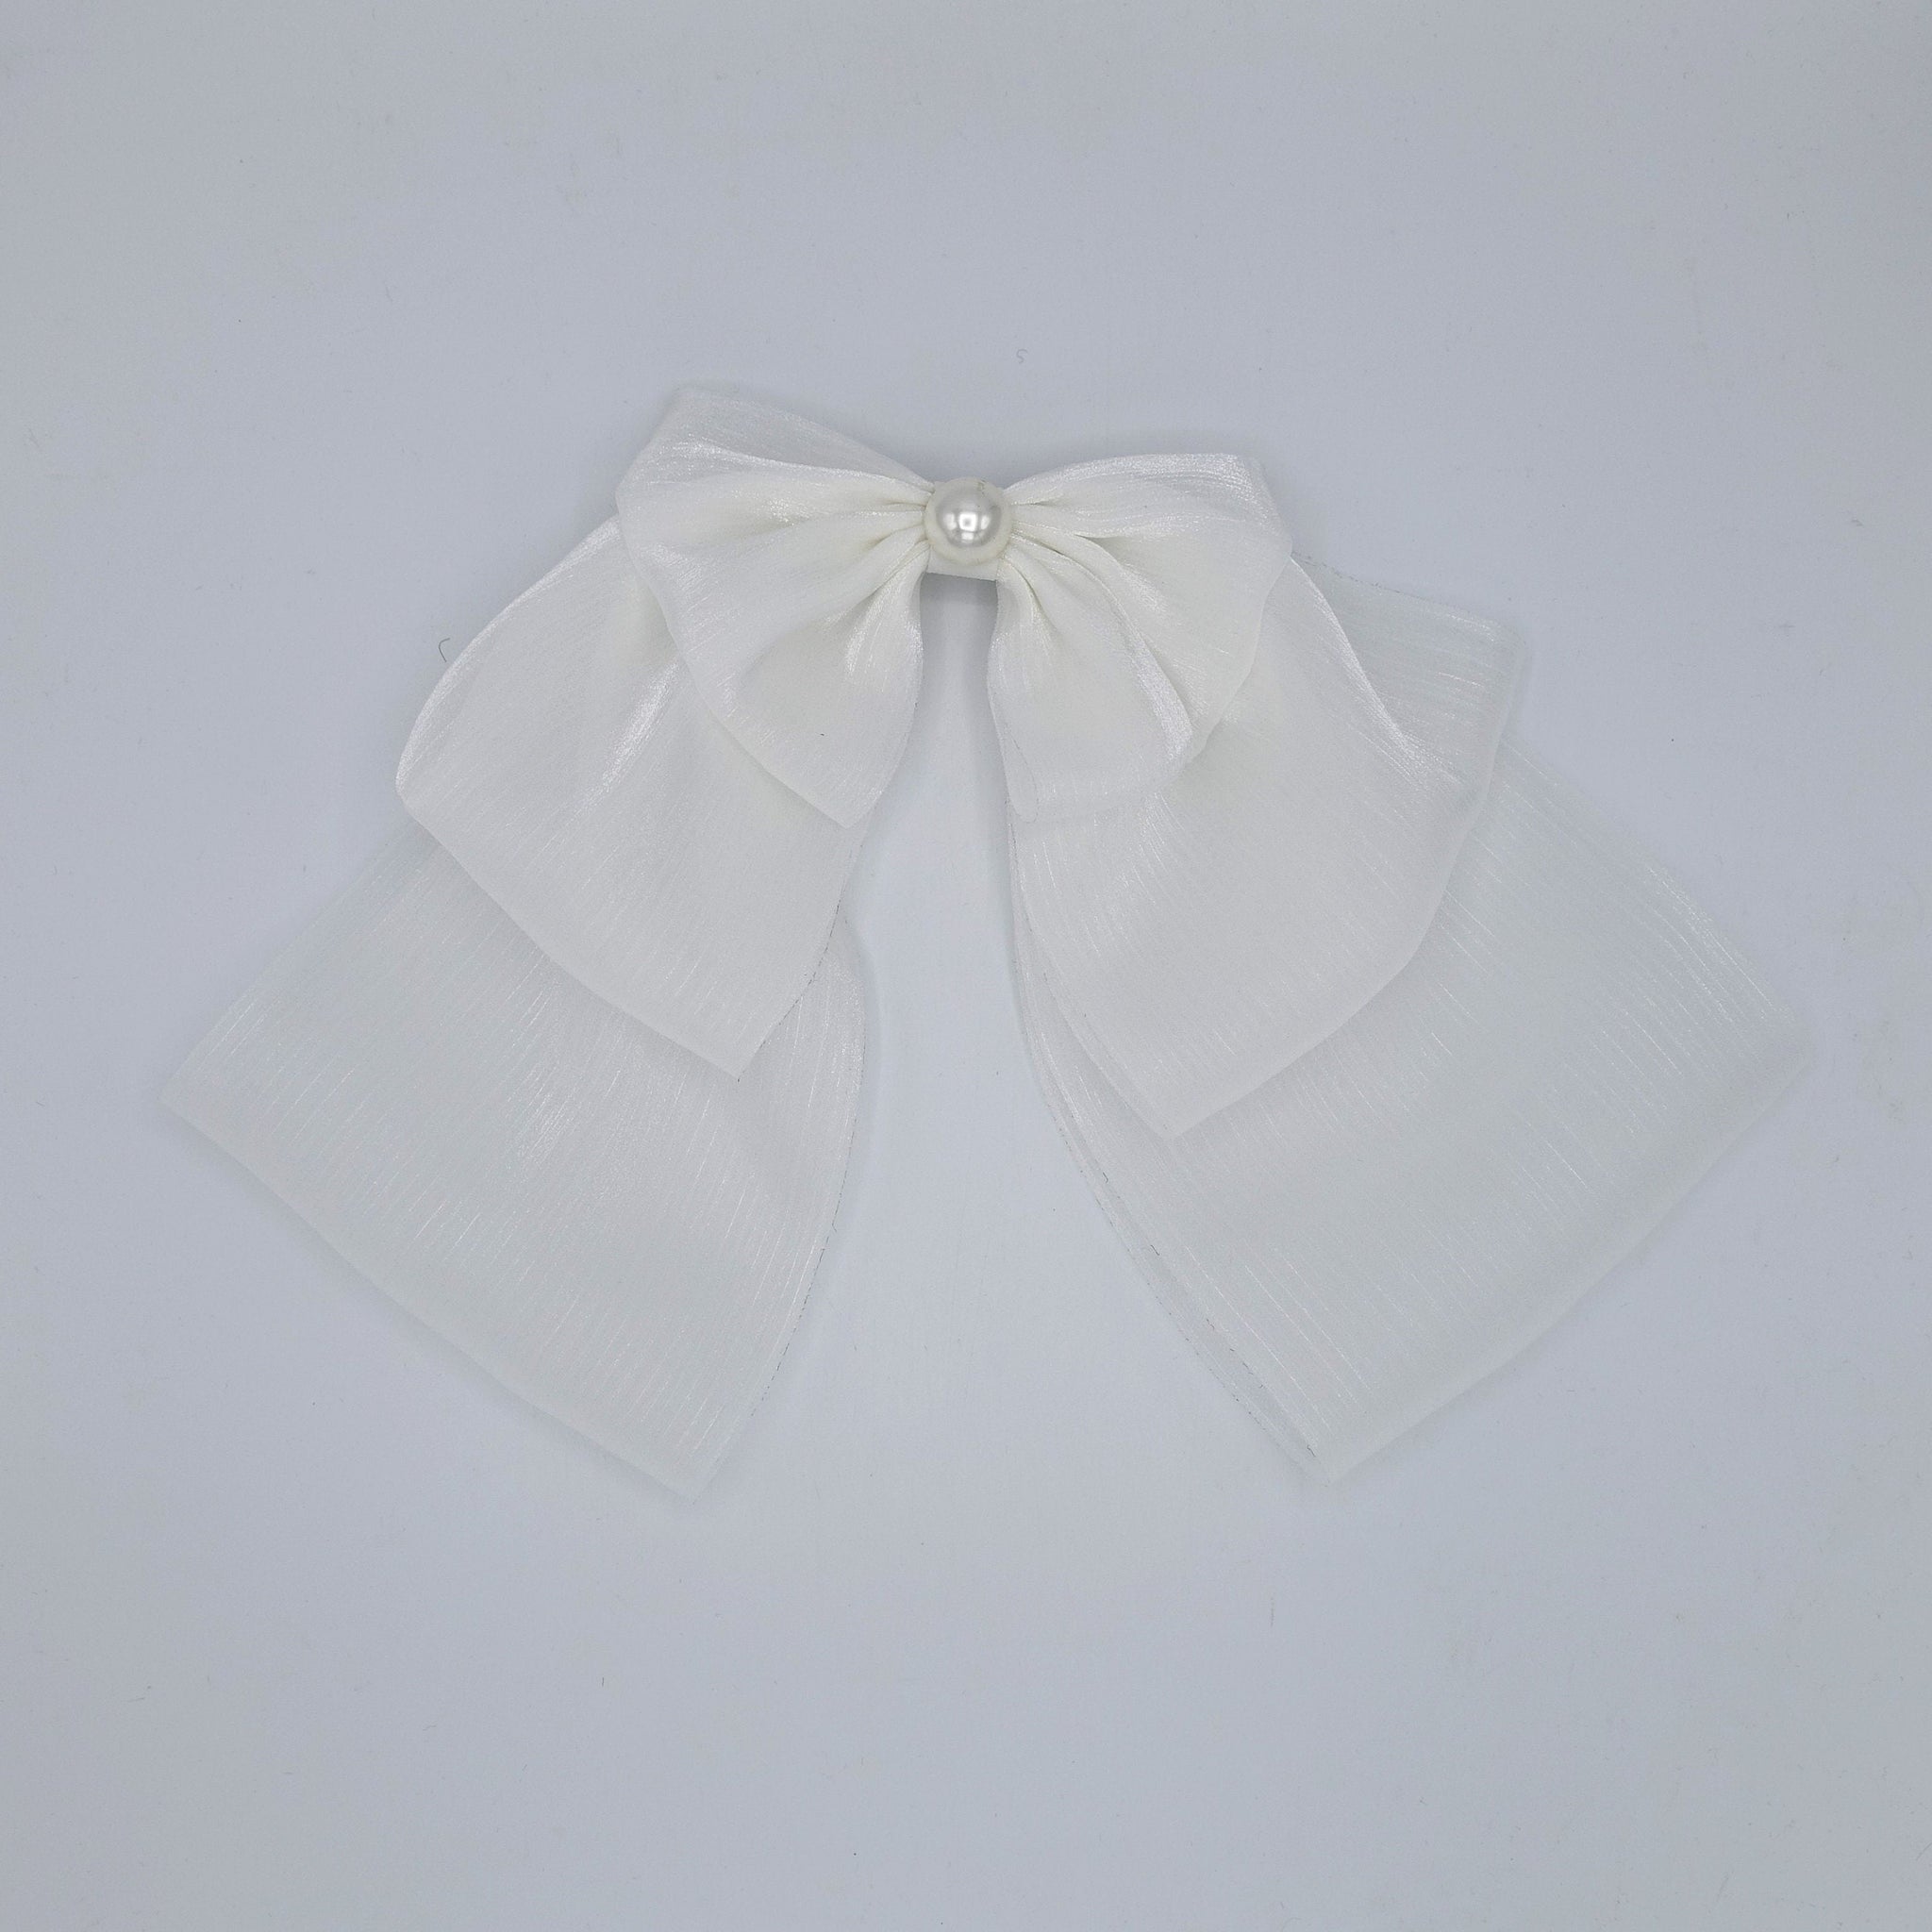 veryshine.com Bridal acc. double layered organza hair bow large hair accessory for women